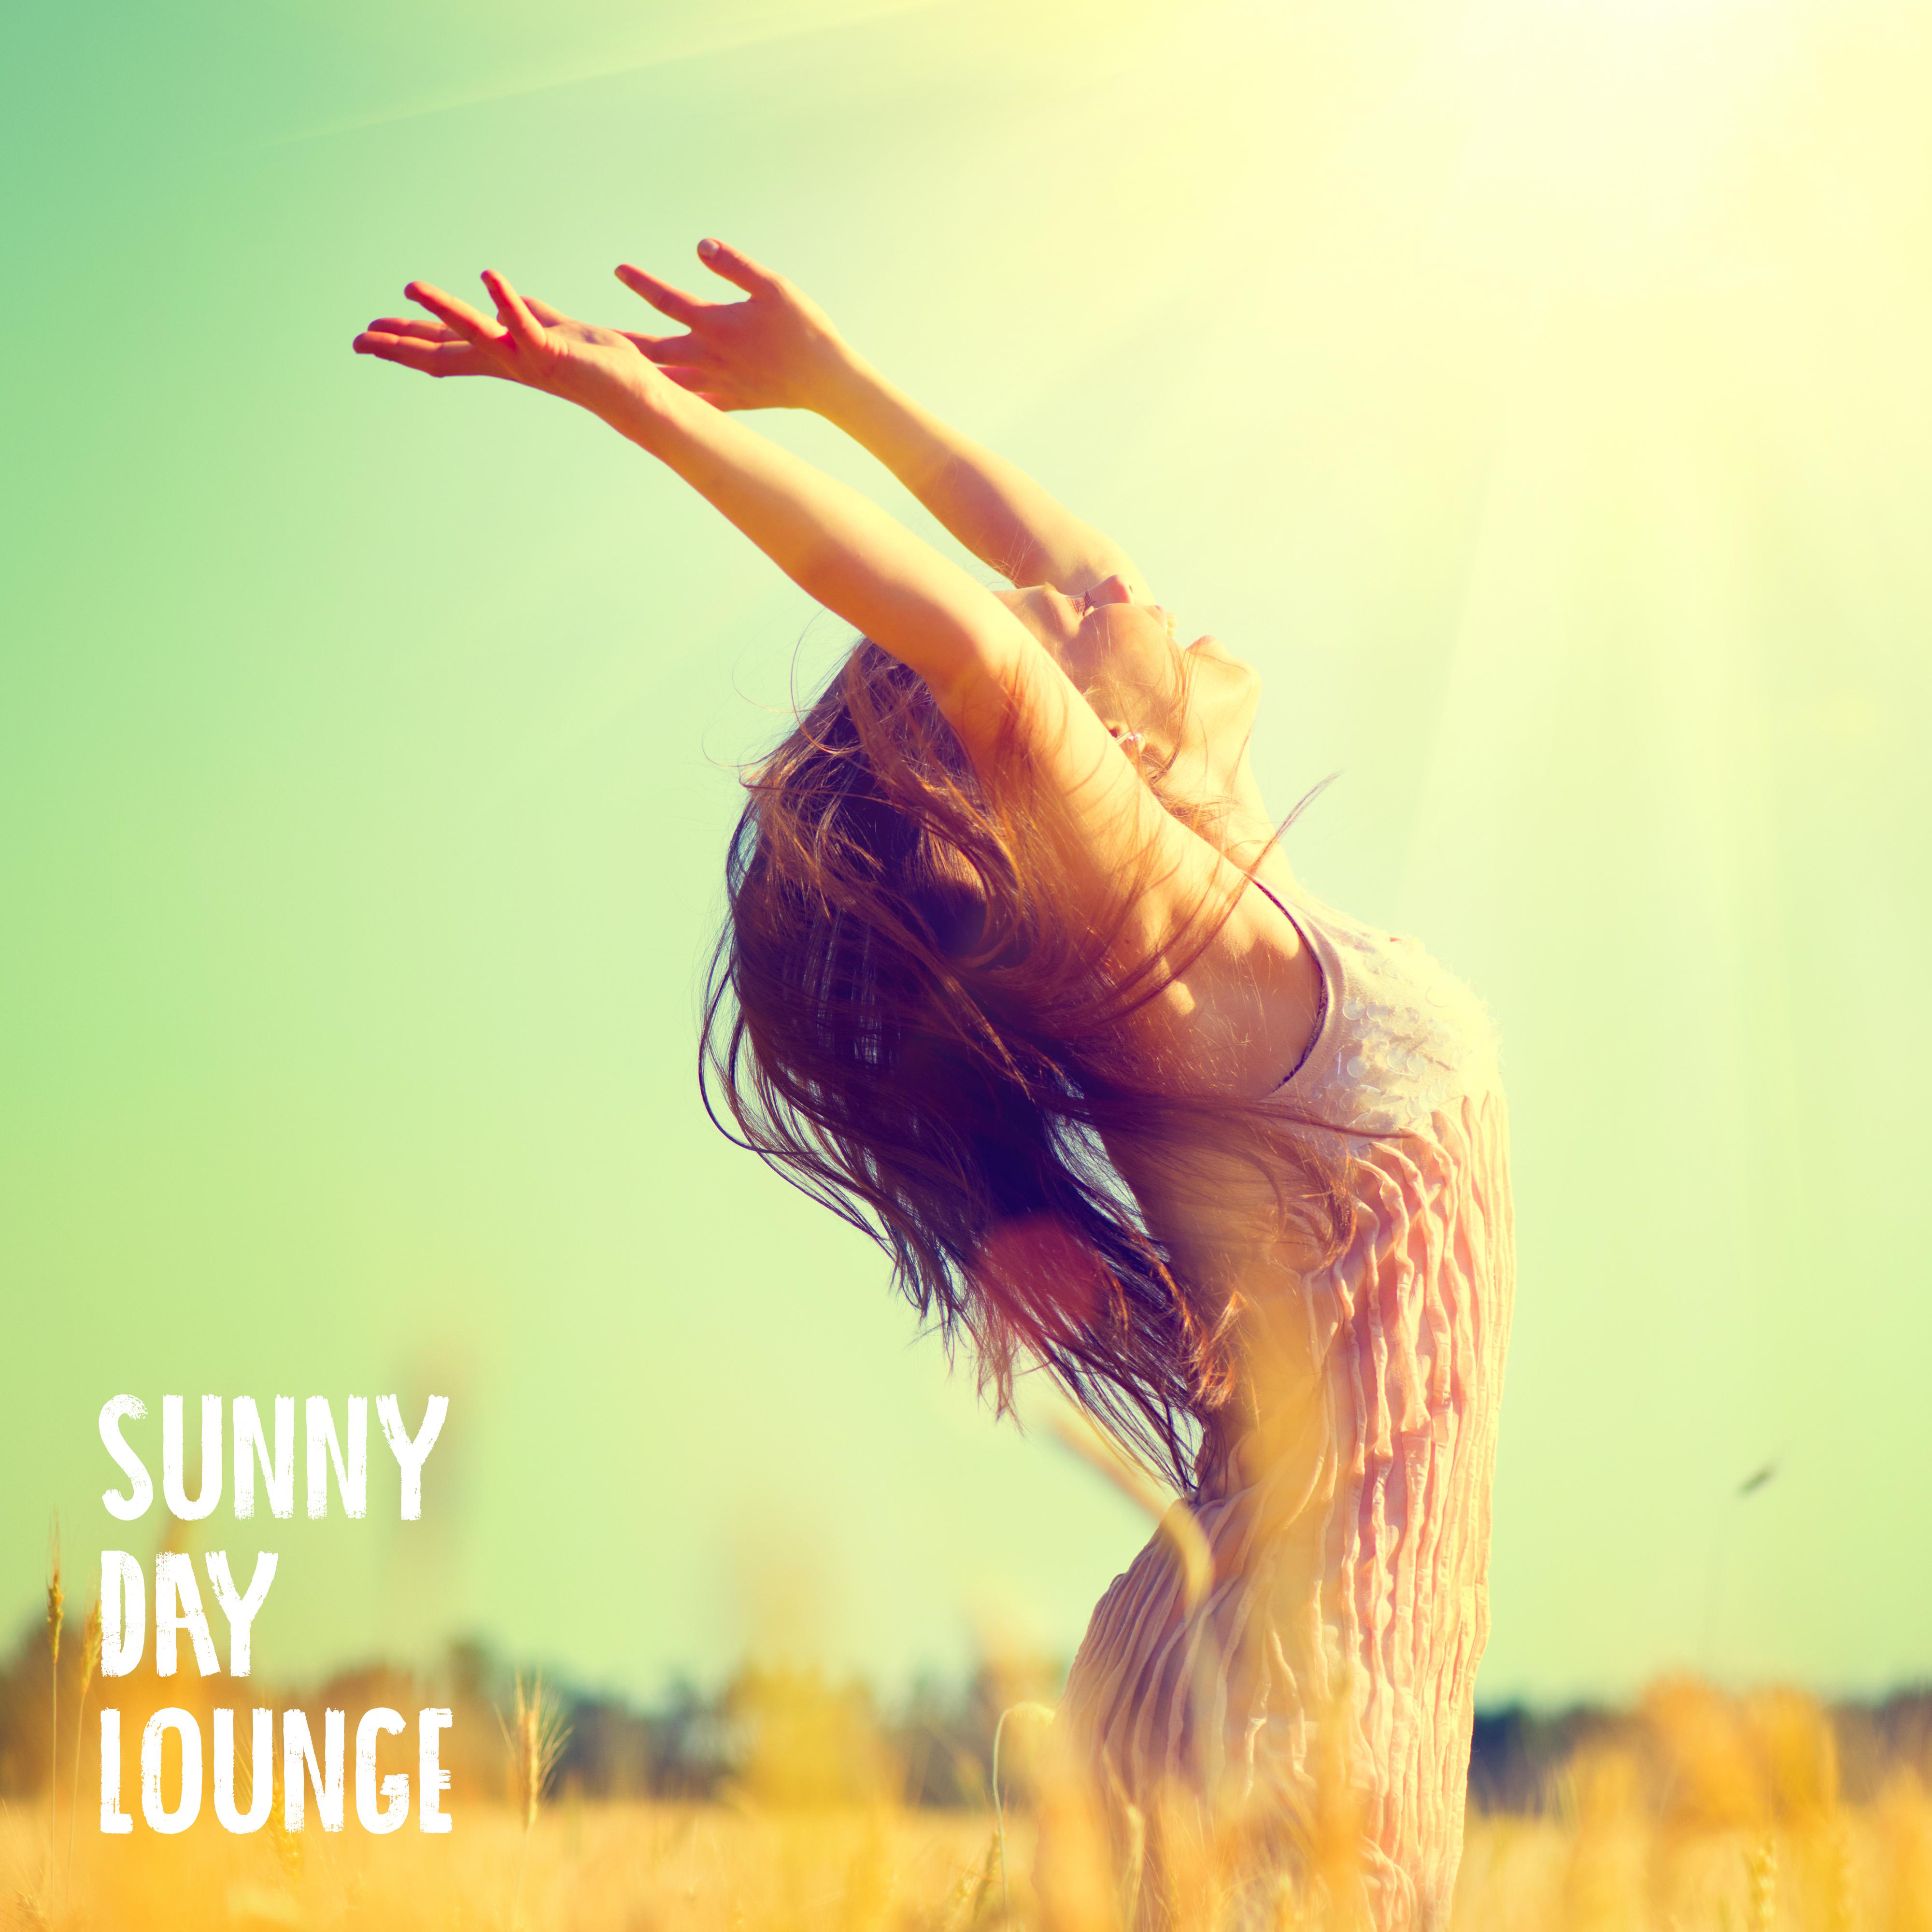 Sunny Day Lounge: Summer Chill Out, Deep Relax, Calm Down, Music Zone, Chillout Lounge, Chilled Ibiza Beats, Tropical Music